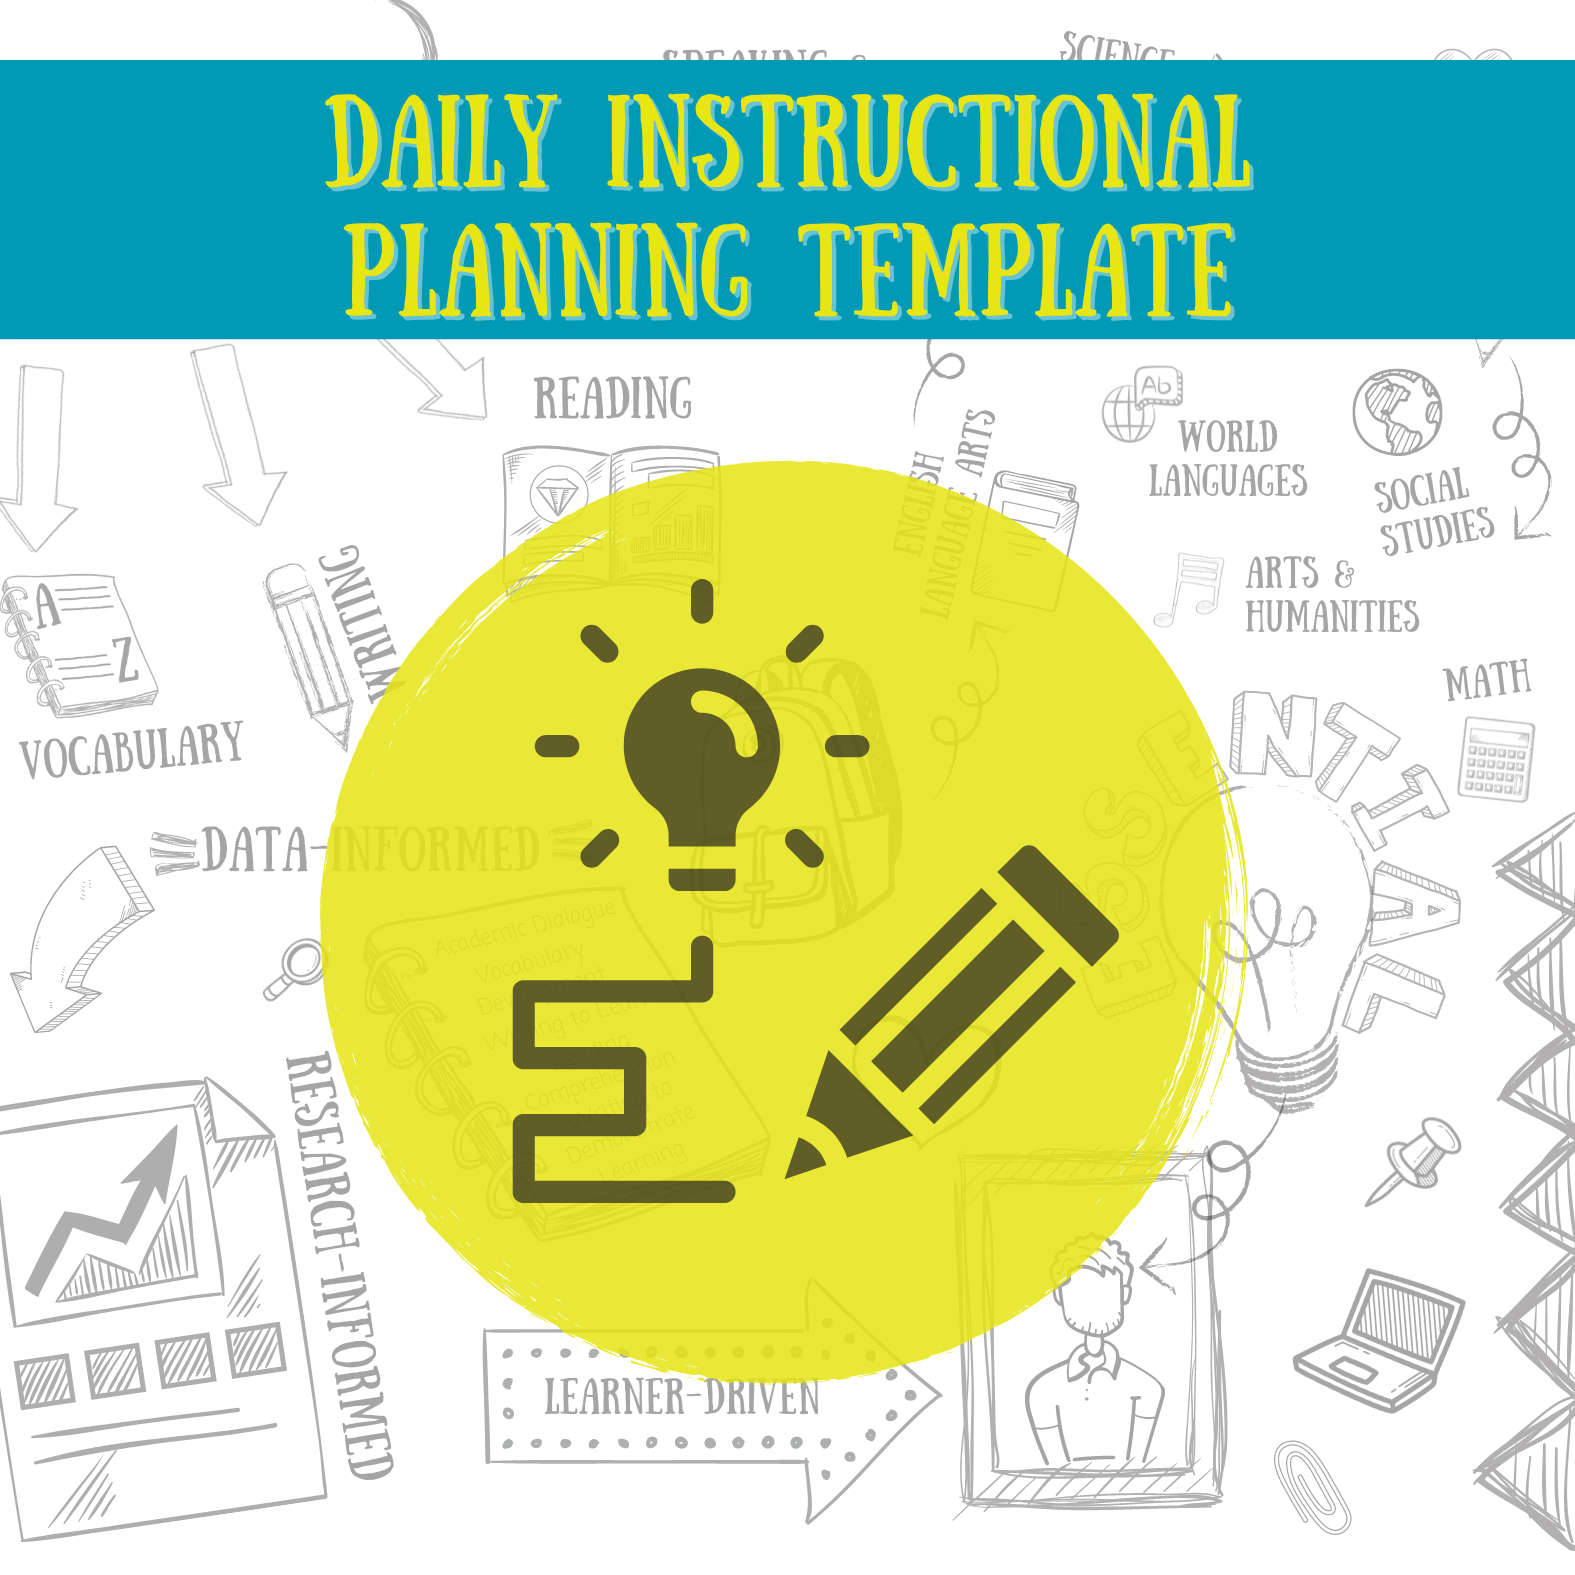 Adolescent Literacy Model- Daily Instructional Planning Template